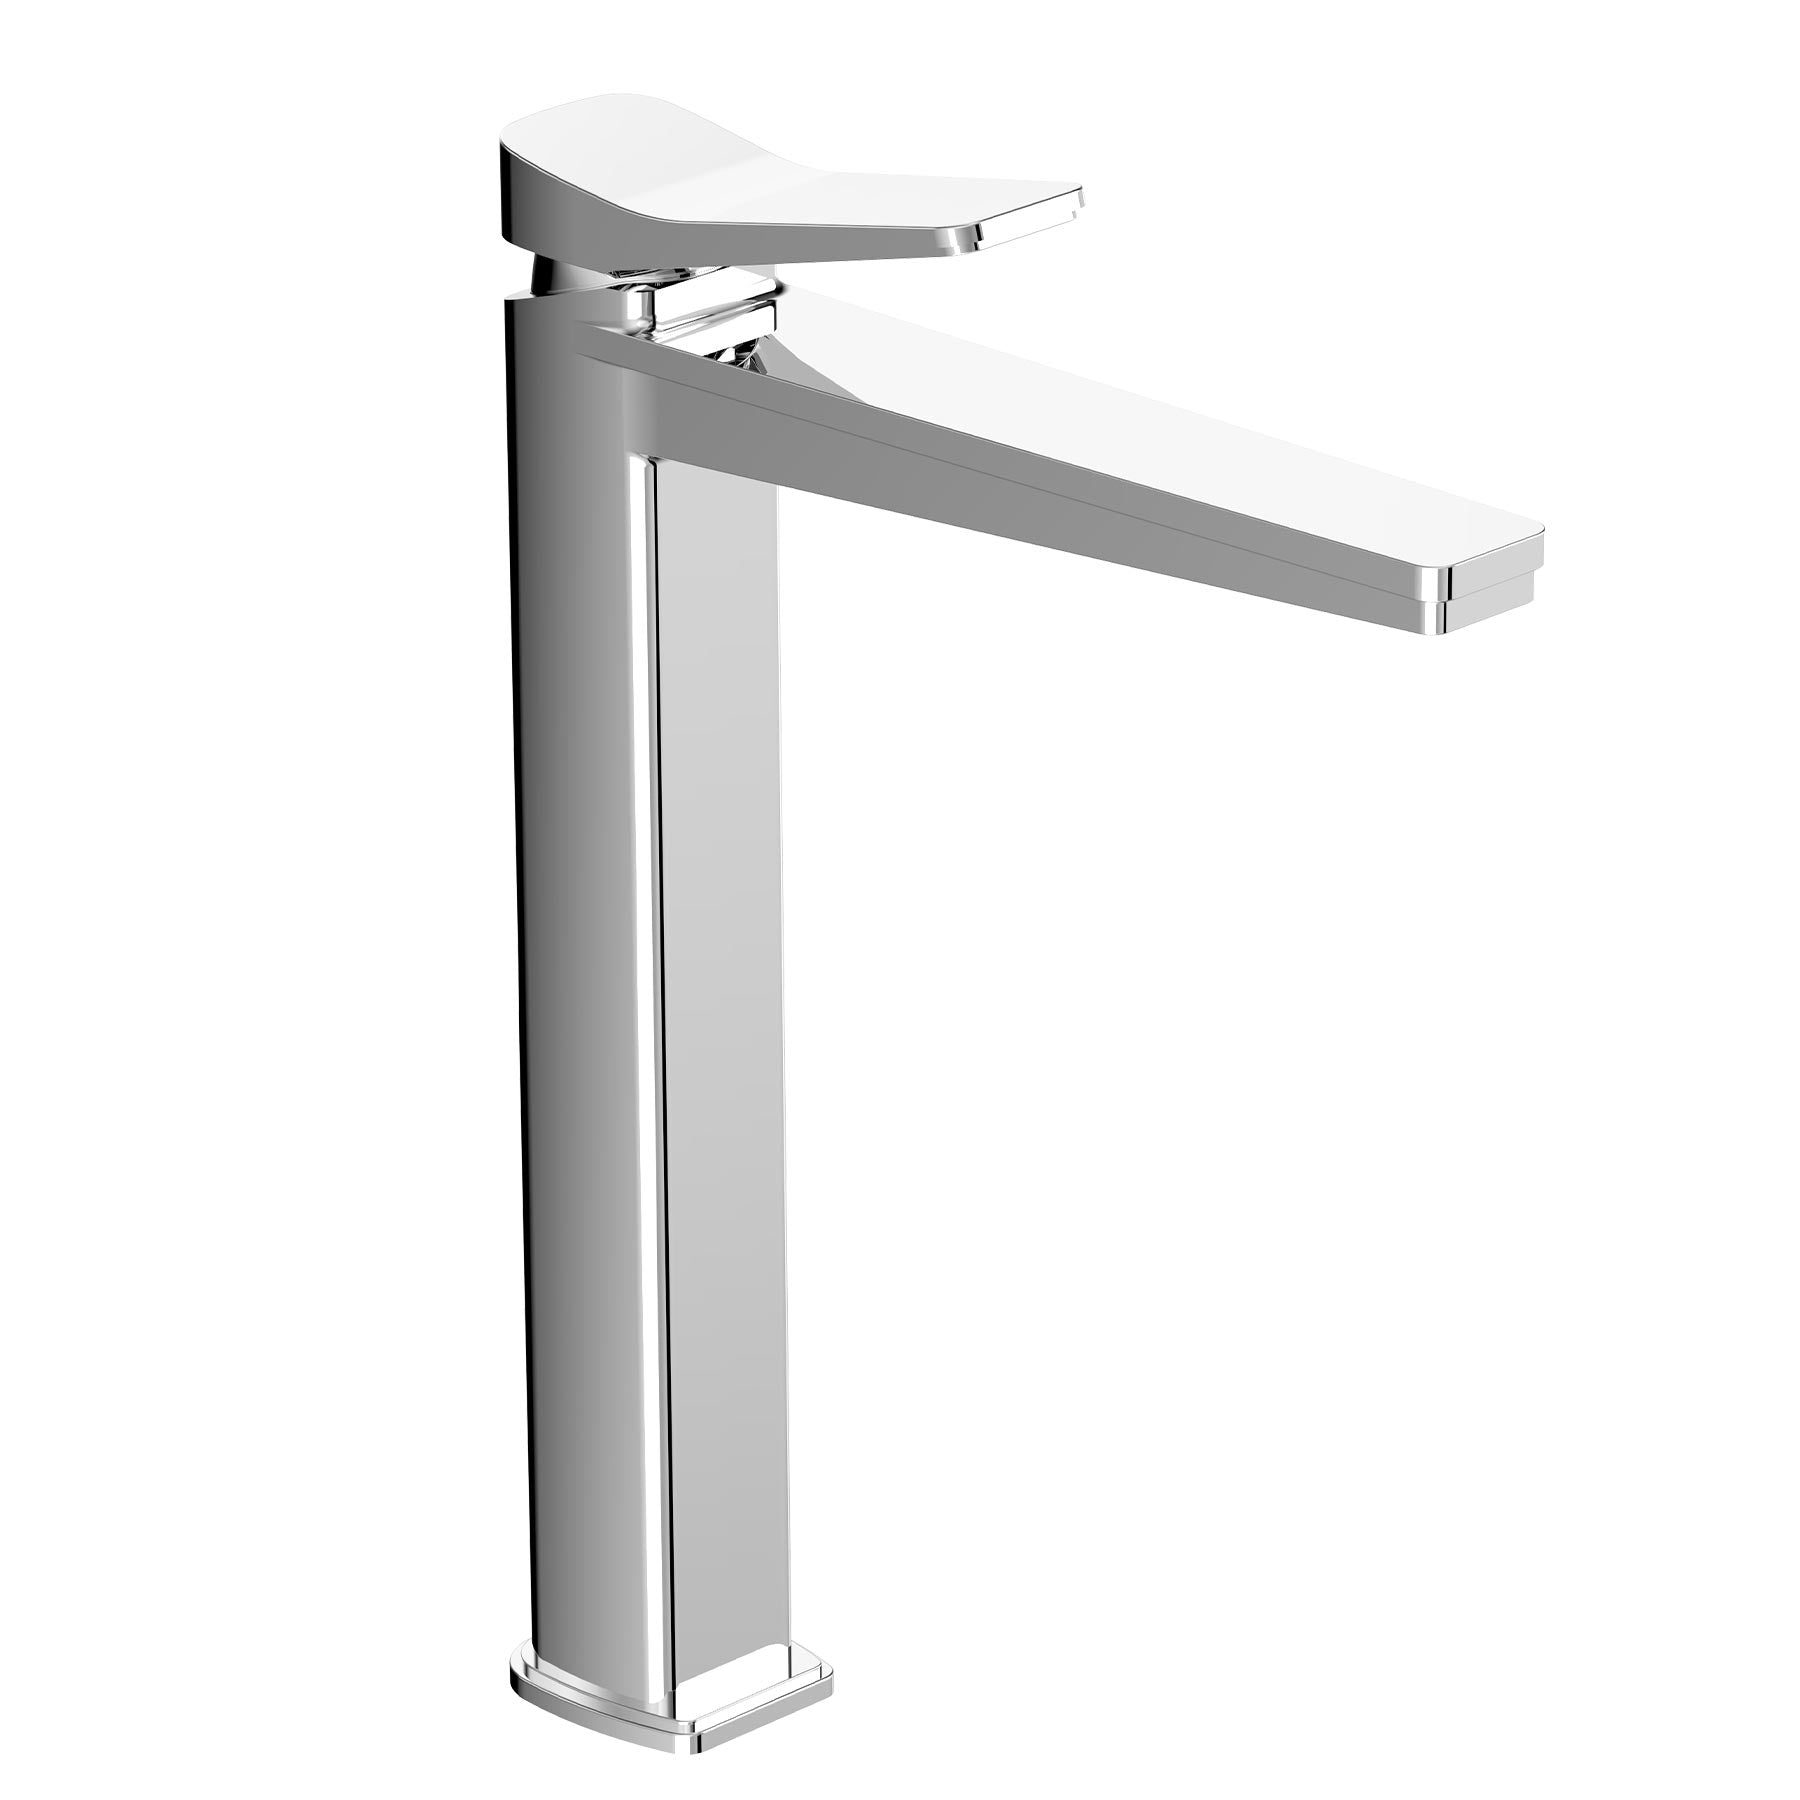 Luxury HIX Single Lever Tall Basin Mixer Tap with Chrome Finish to add a Contemporary Touch